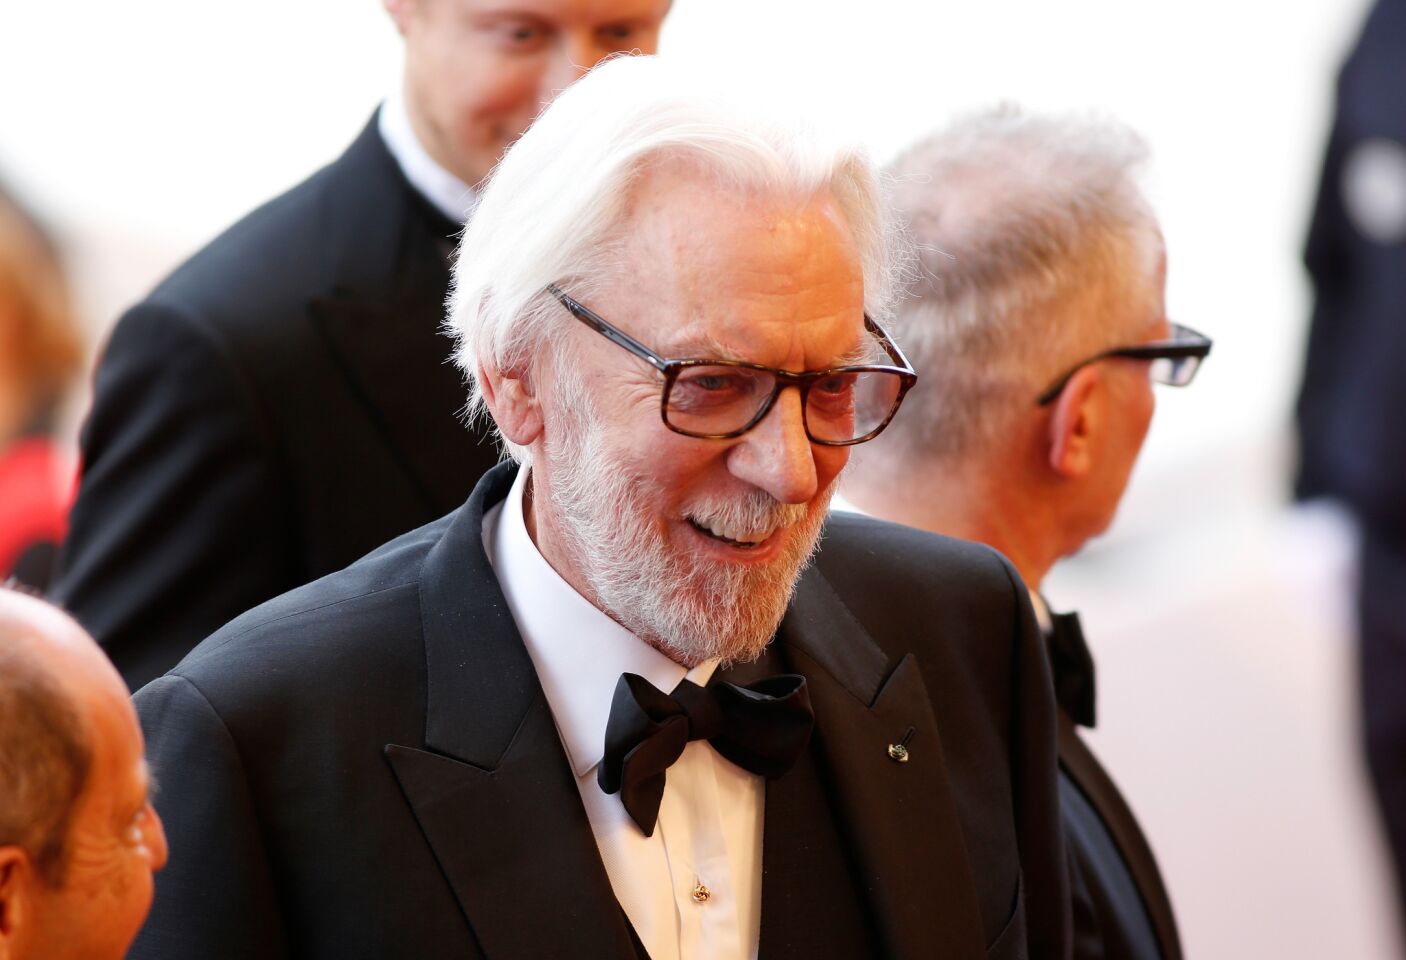 Cannes Film Festival jury member Donald Sutherland attends the "Cafe Society" premiere and opening night festival gala at the Palais des Festivals on May 11.